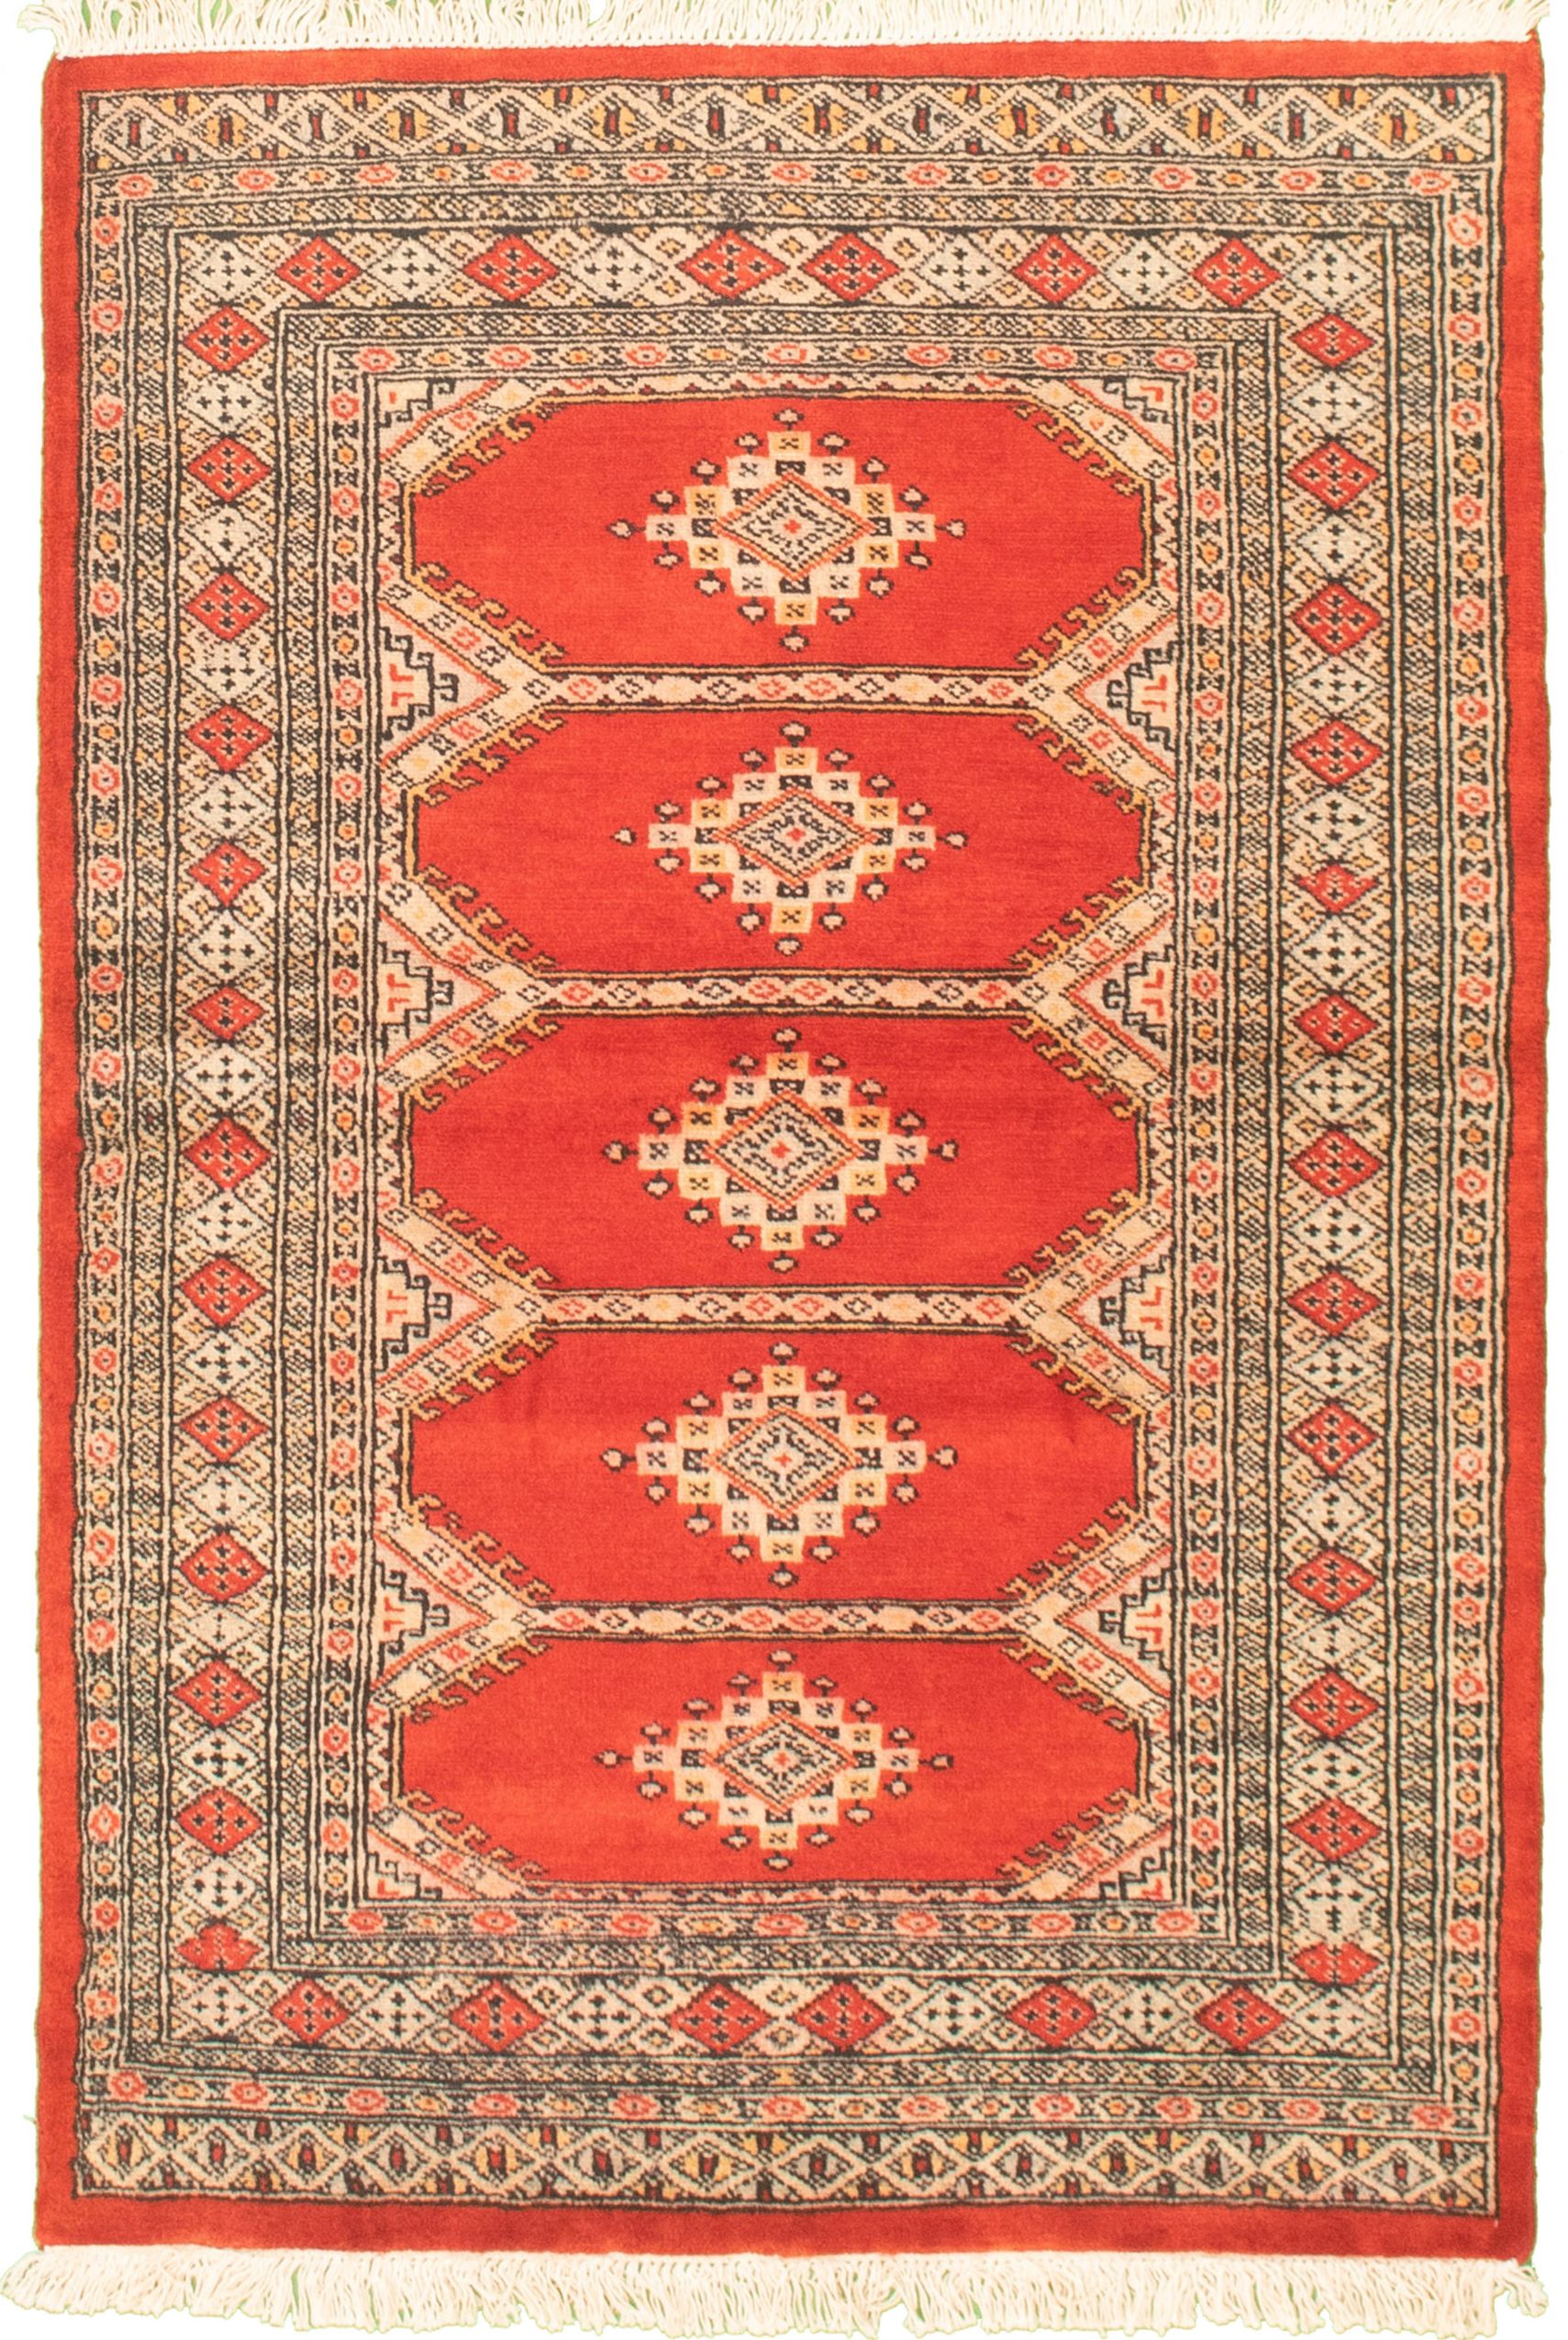 Hand-knotted Finest Peshawar Bokhara Red Wool Rug 3'1" x 4'10"  Size: 3'1" x 4'10"  